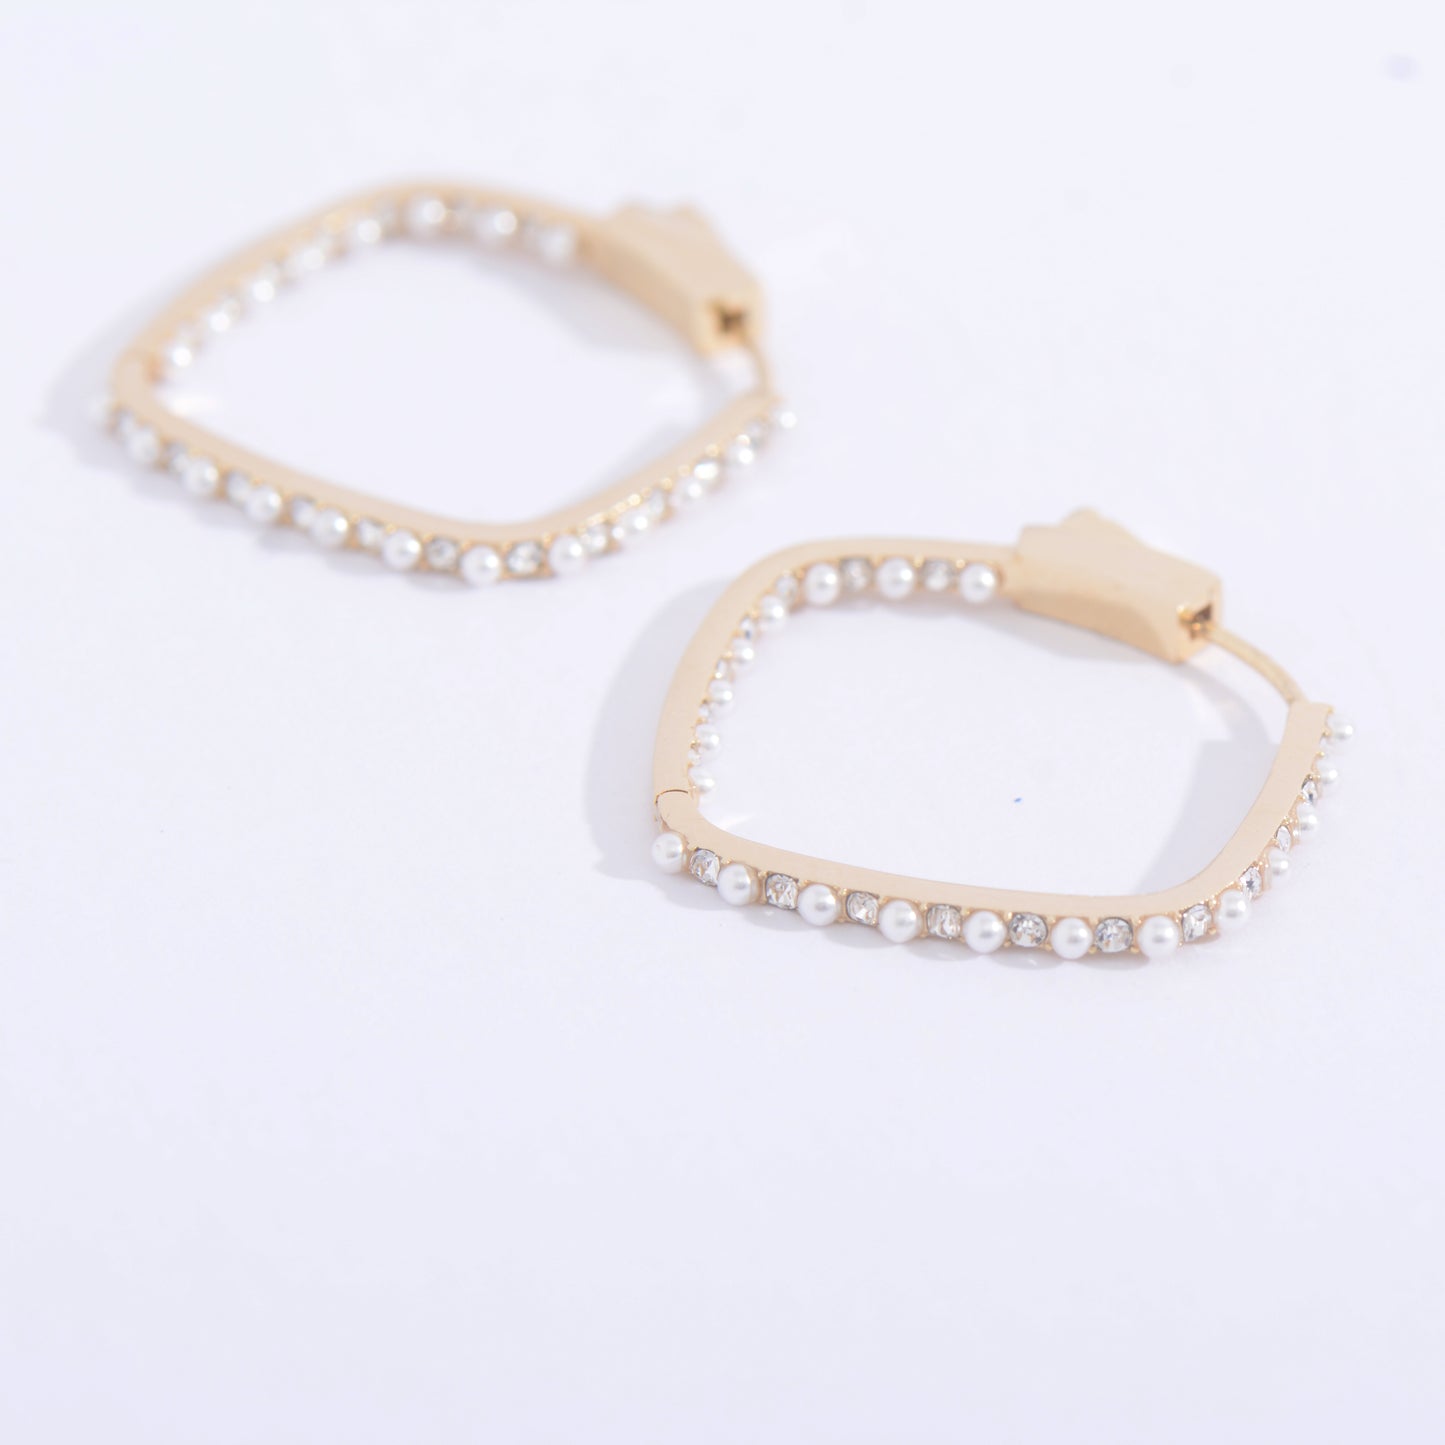 Gold Plated Pearl Rounded Square Hoop Earrings